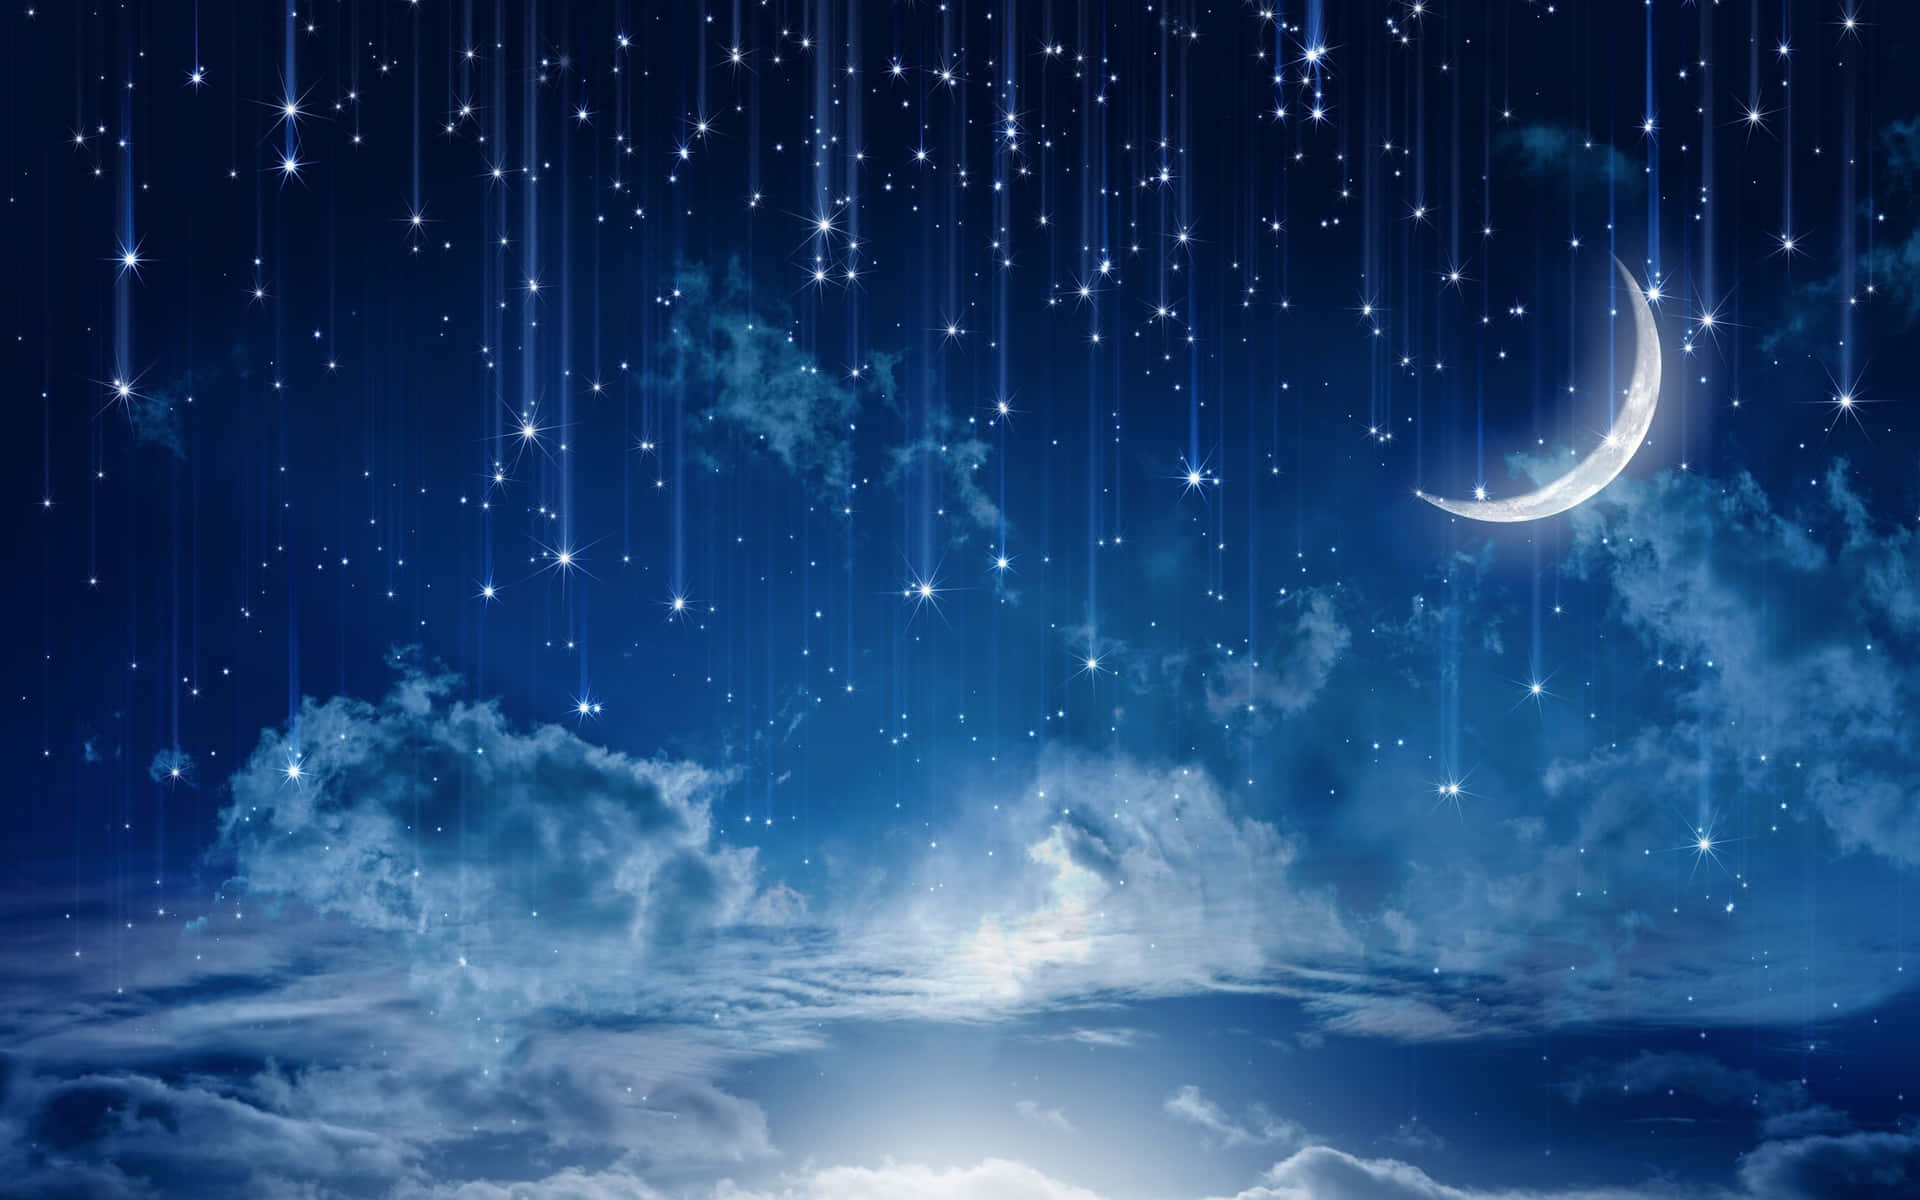 Magical Night Sky With Crescent Moon And Many Falling Stars Wallpaper